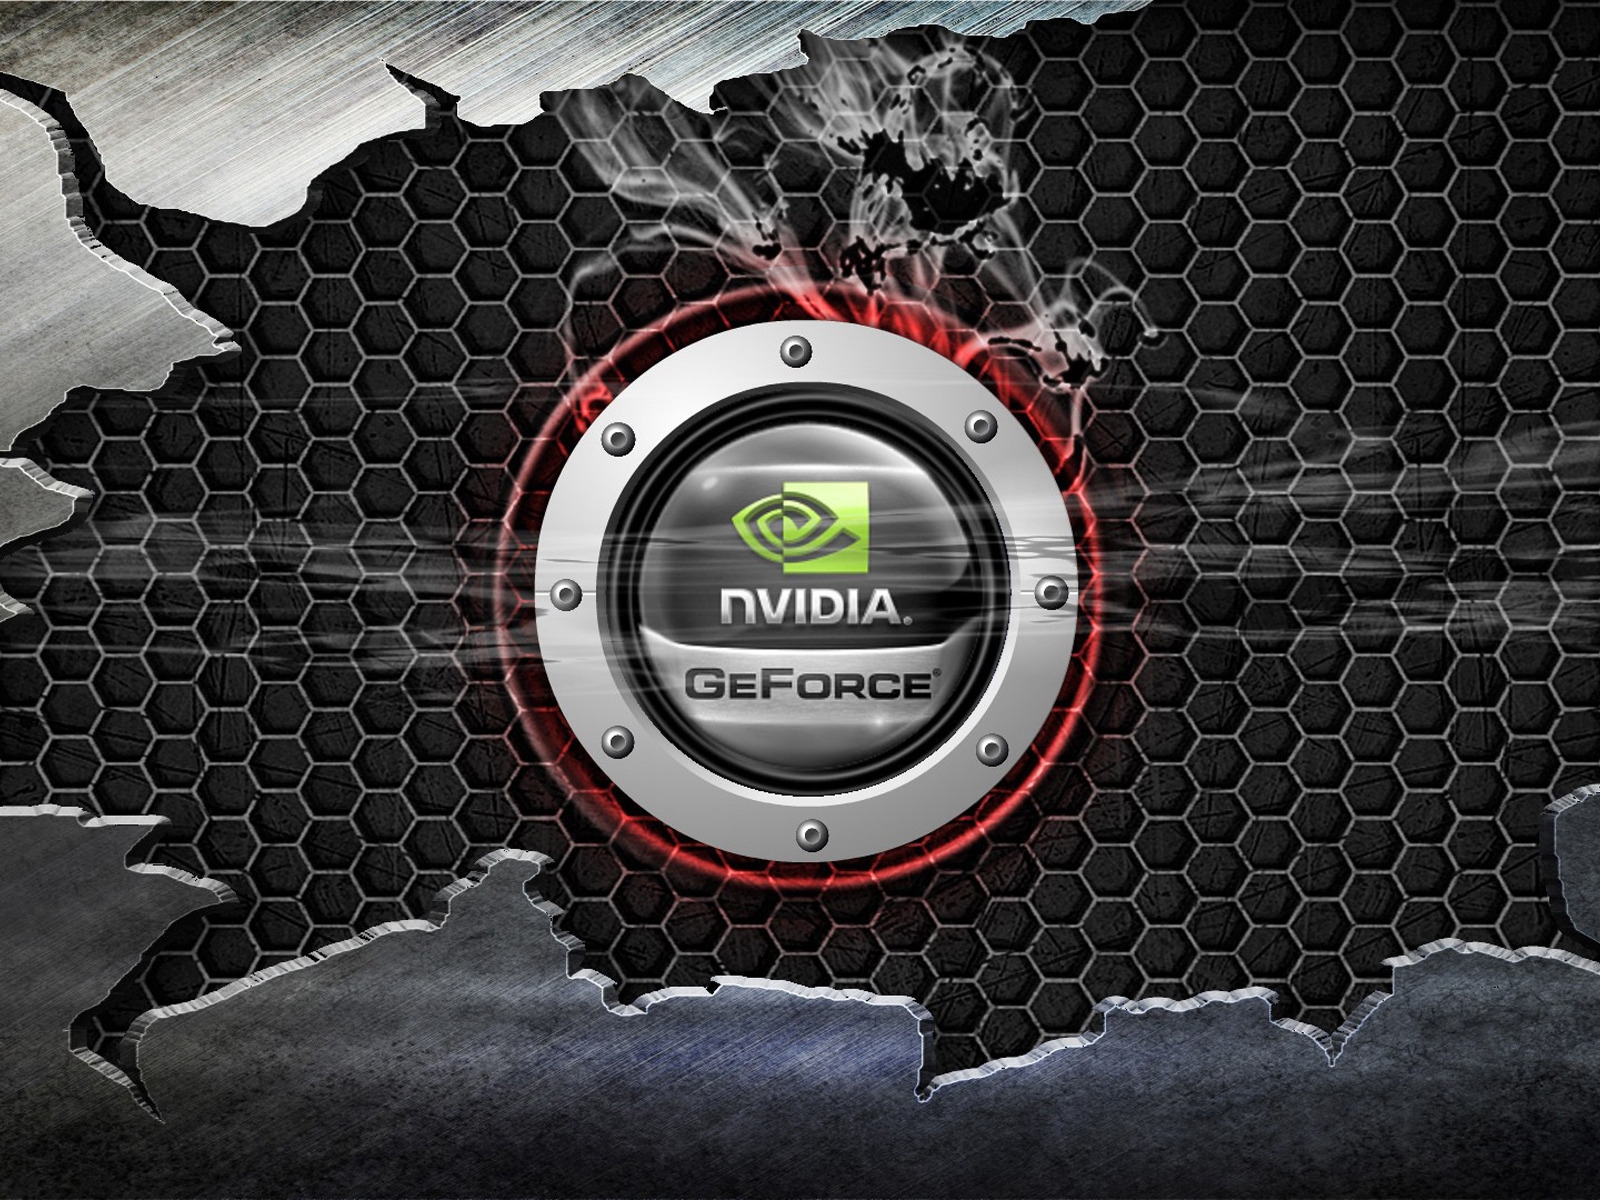 nVIDIA for 1600 x 1200 resolution